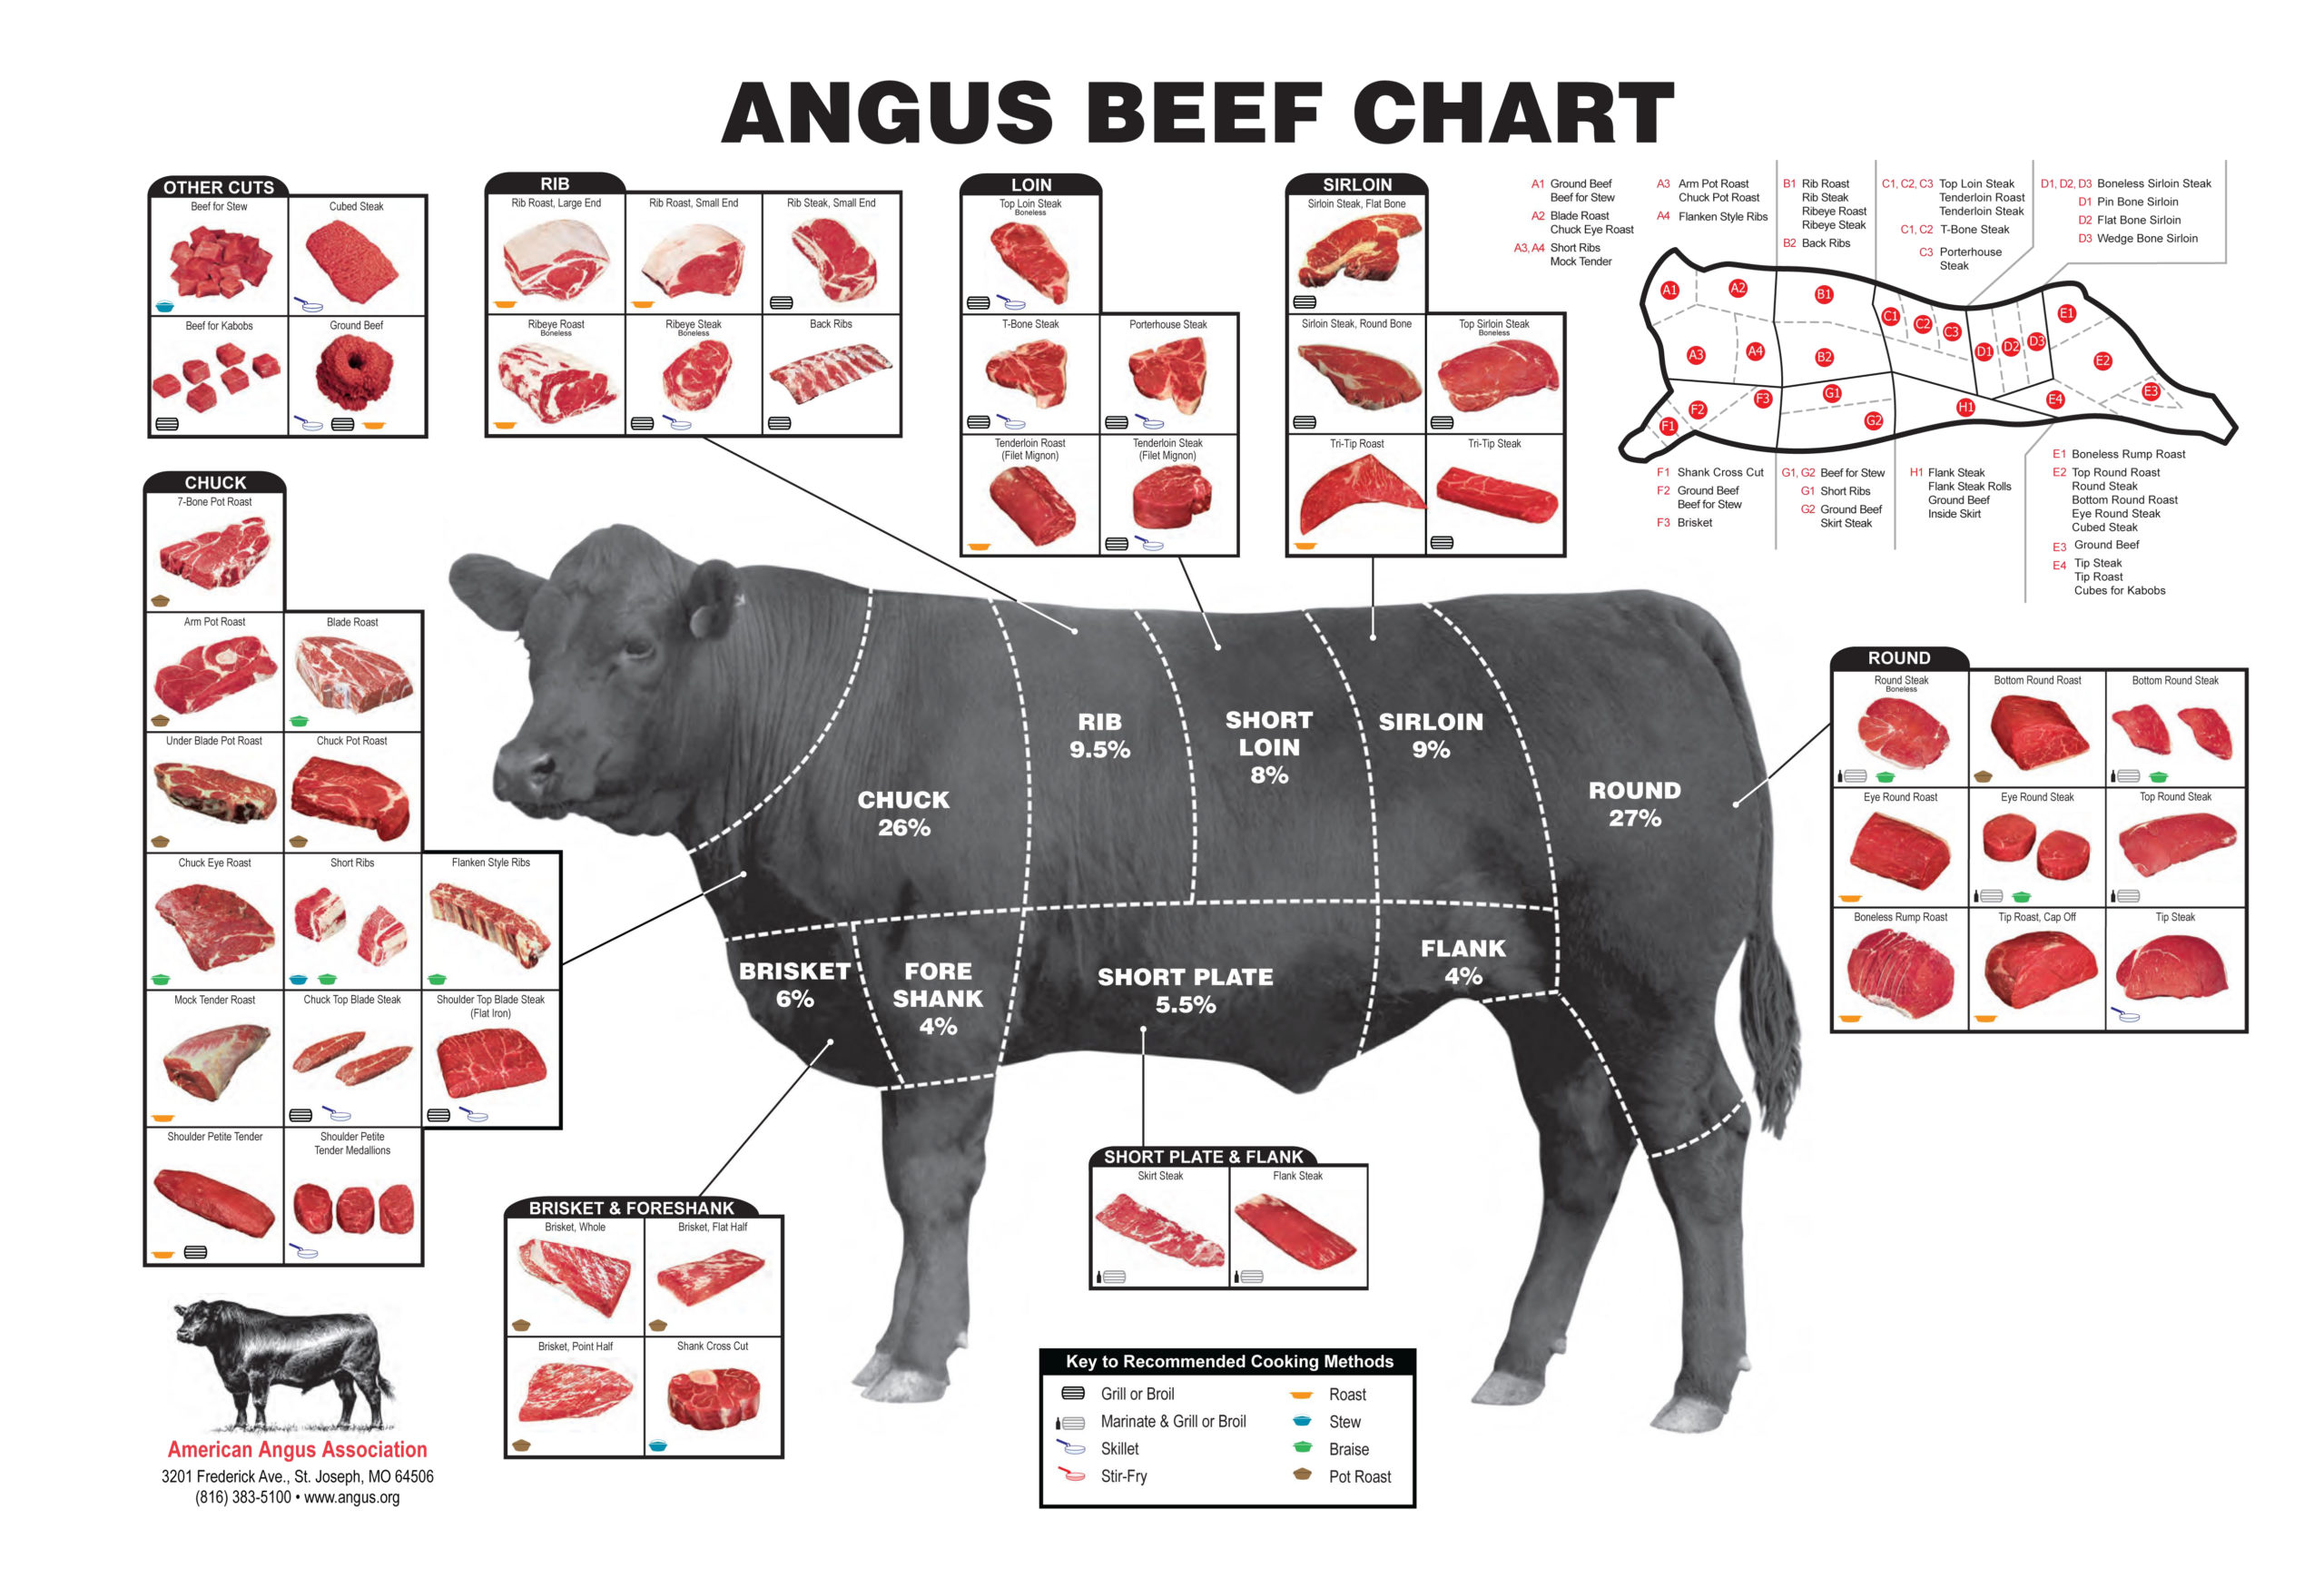 Basic Cuts of Beef